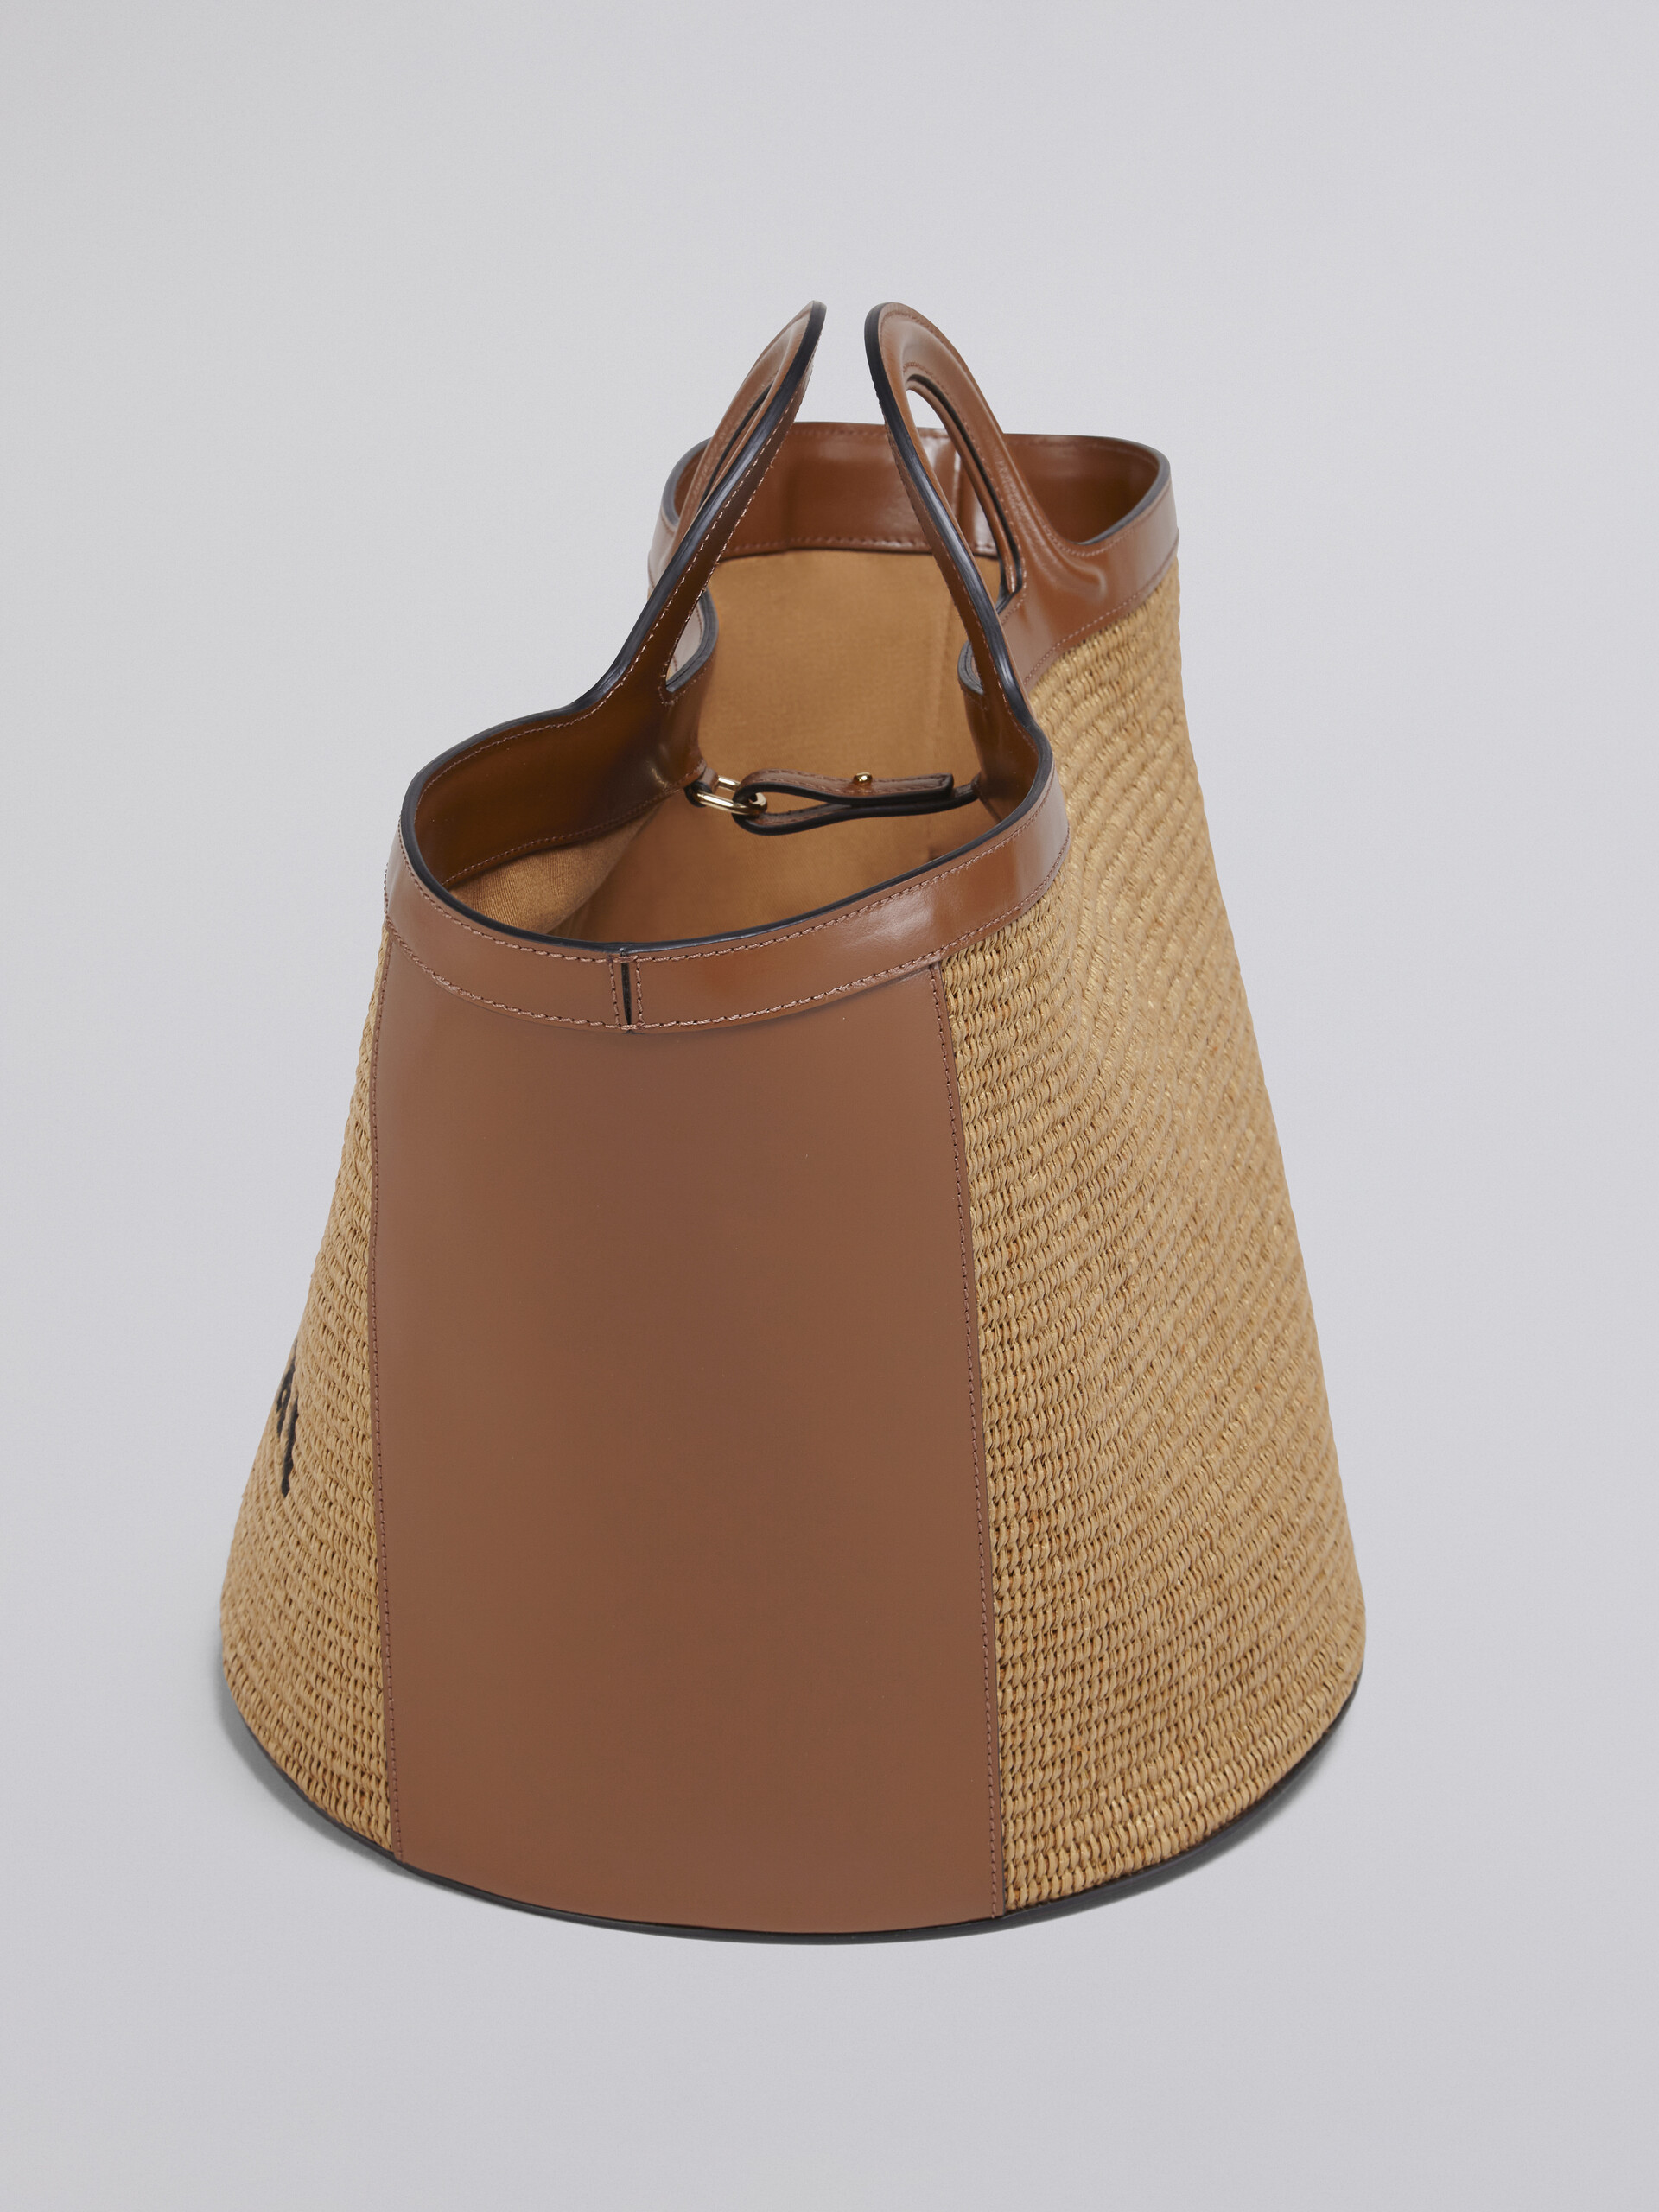 TROPICALIA large bag in brown leather and raffia - Handbags - Image 5